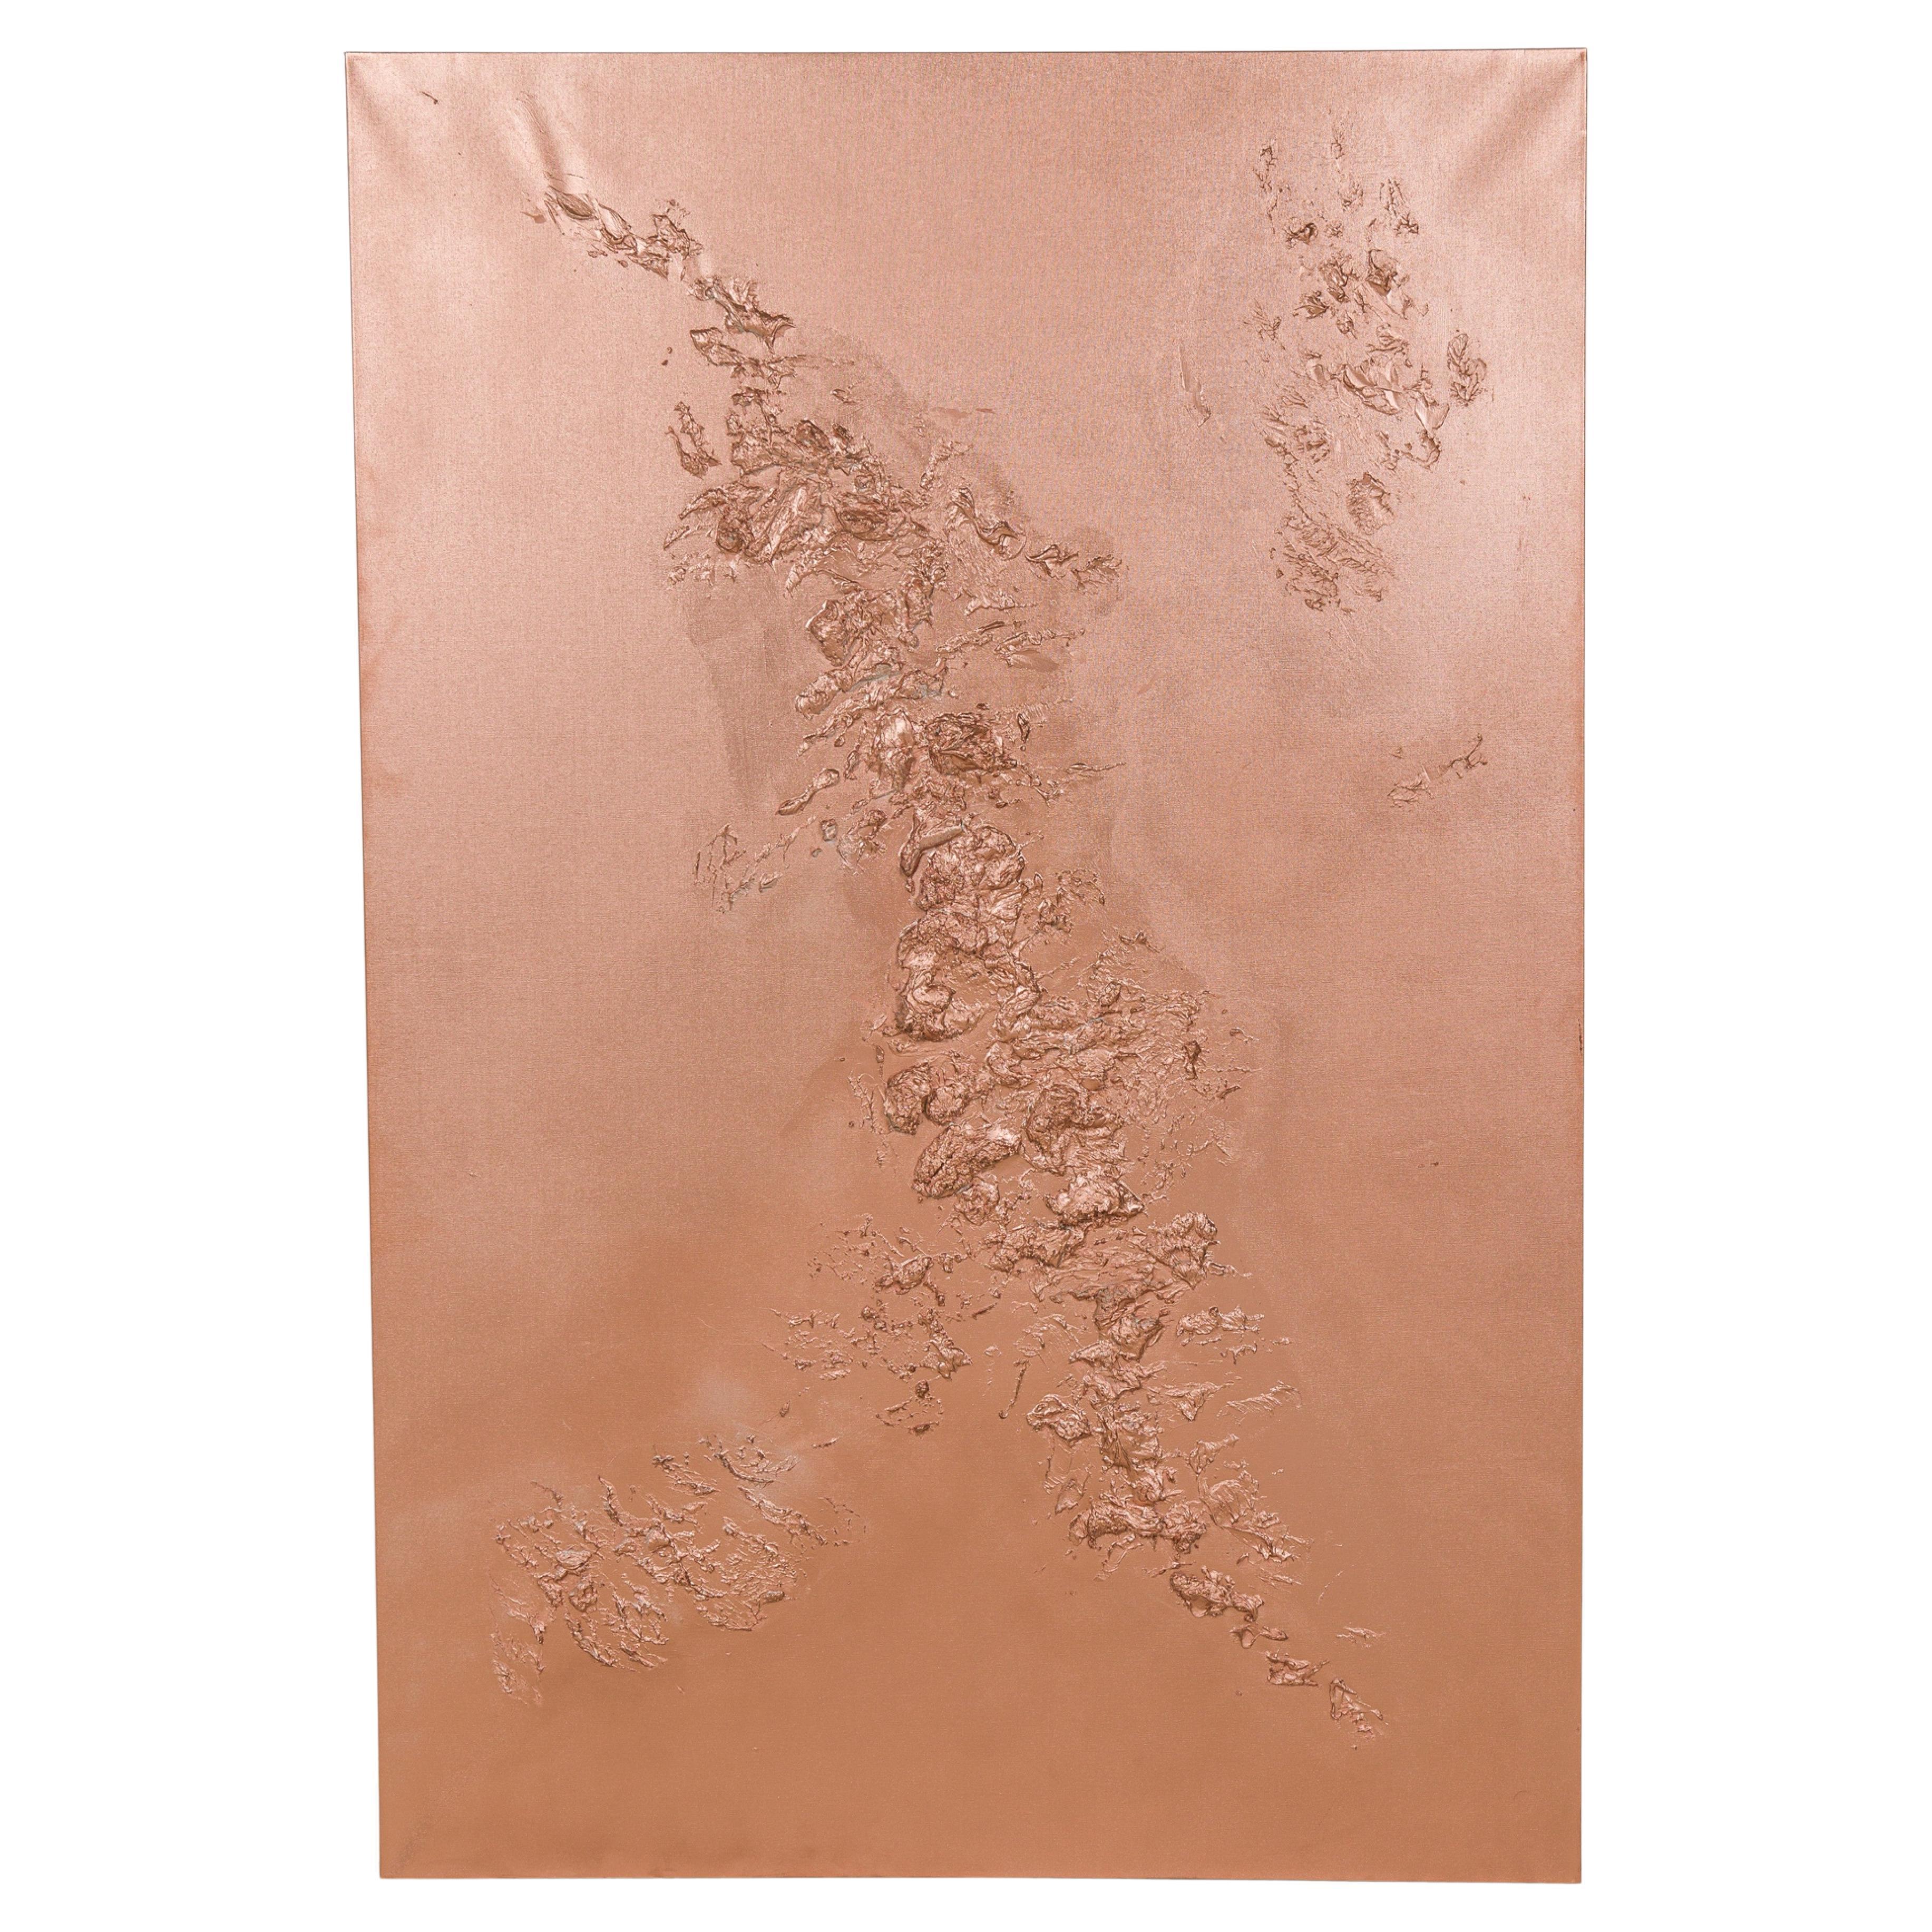 Contemporary Abstract Mixed Media Metallic Copper Textural Painting on Canvas For Sale